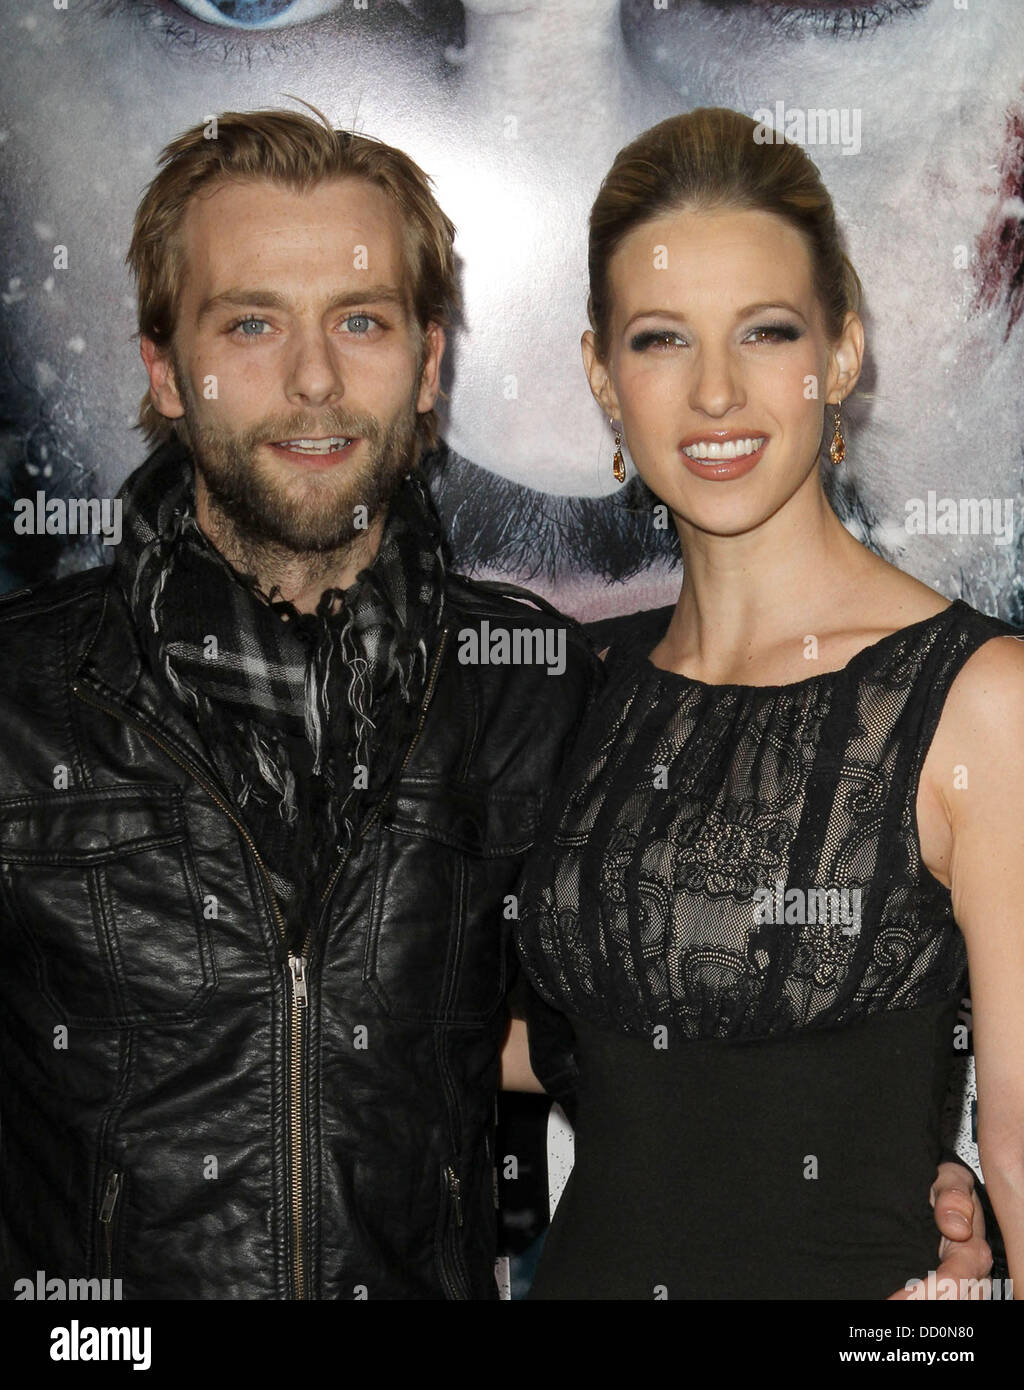 Joe Anderson and wife Elle Anderson The World Premiere Of 'The Grey'  held at the Regal Cinemas - Arrivals Los Angeles, California - 11.01.12 Stock Photo